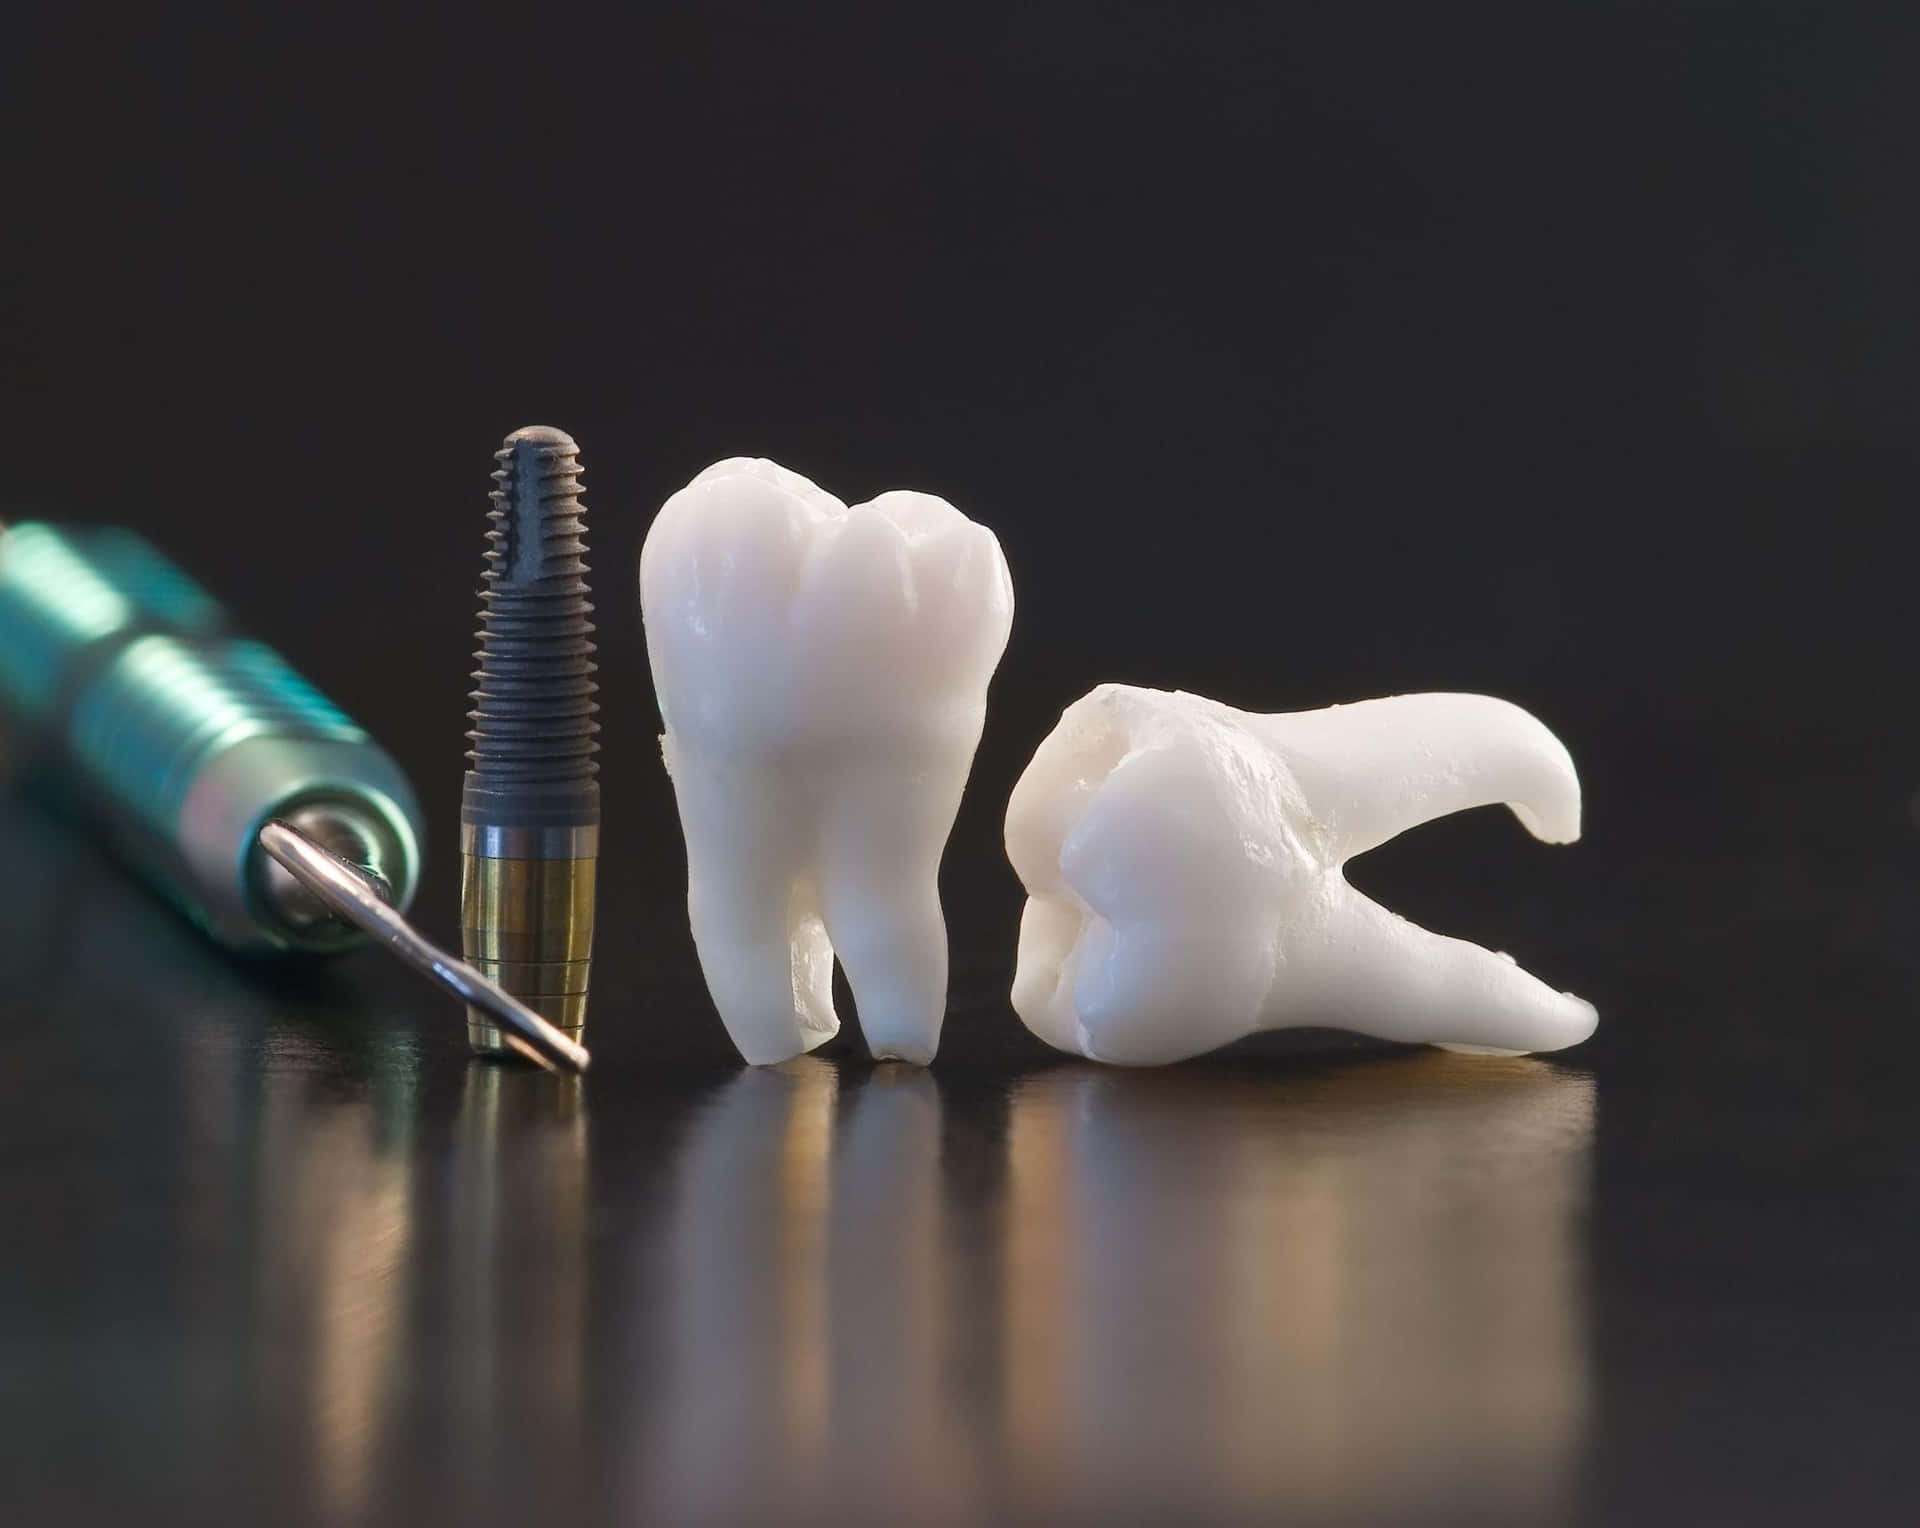 A Tooth And A Dental Implant On A Black Surface